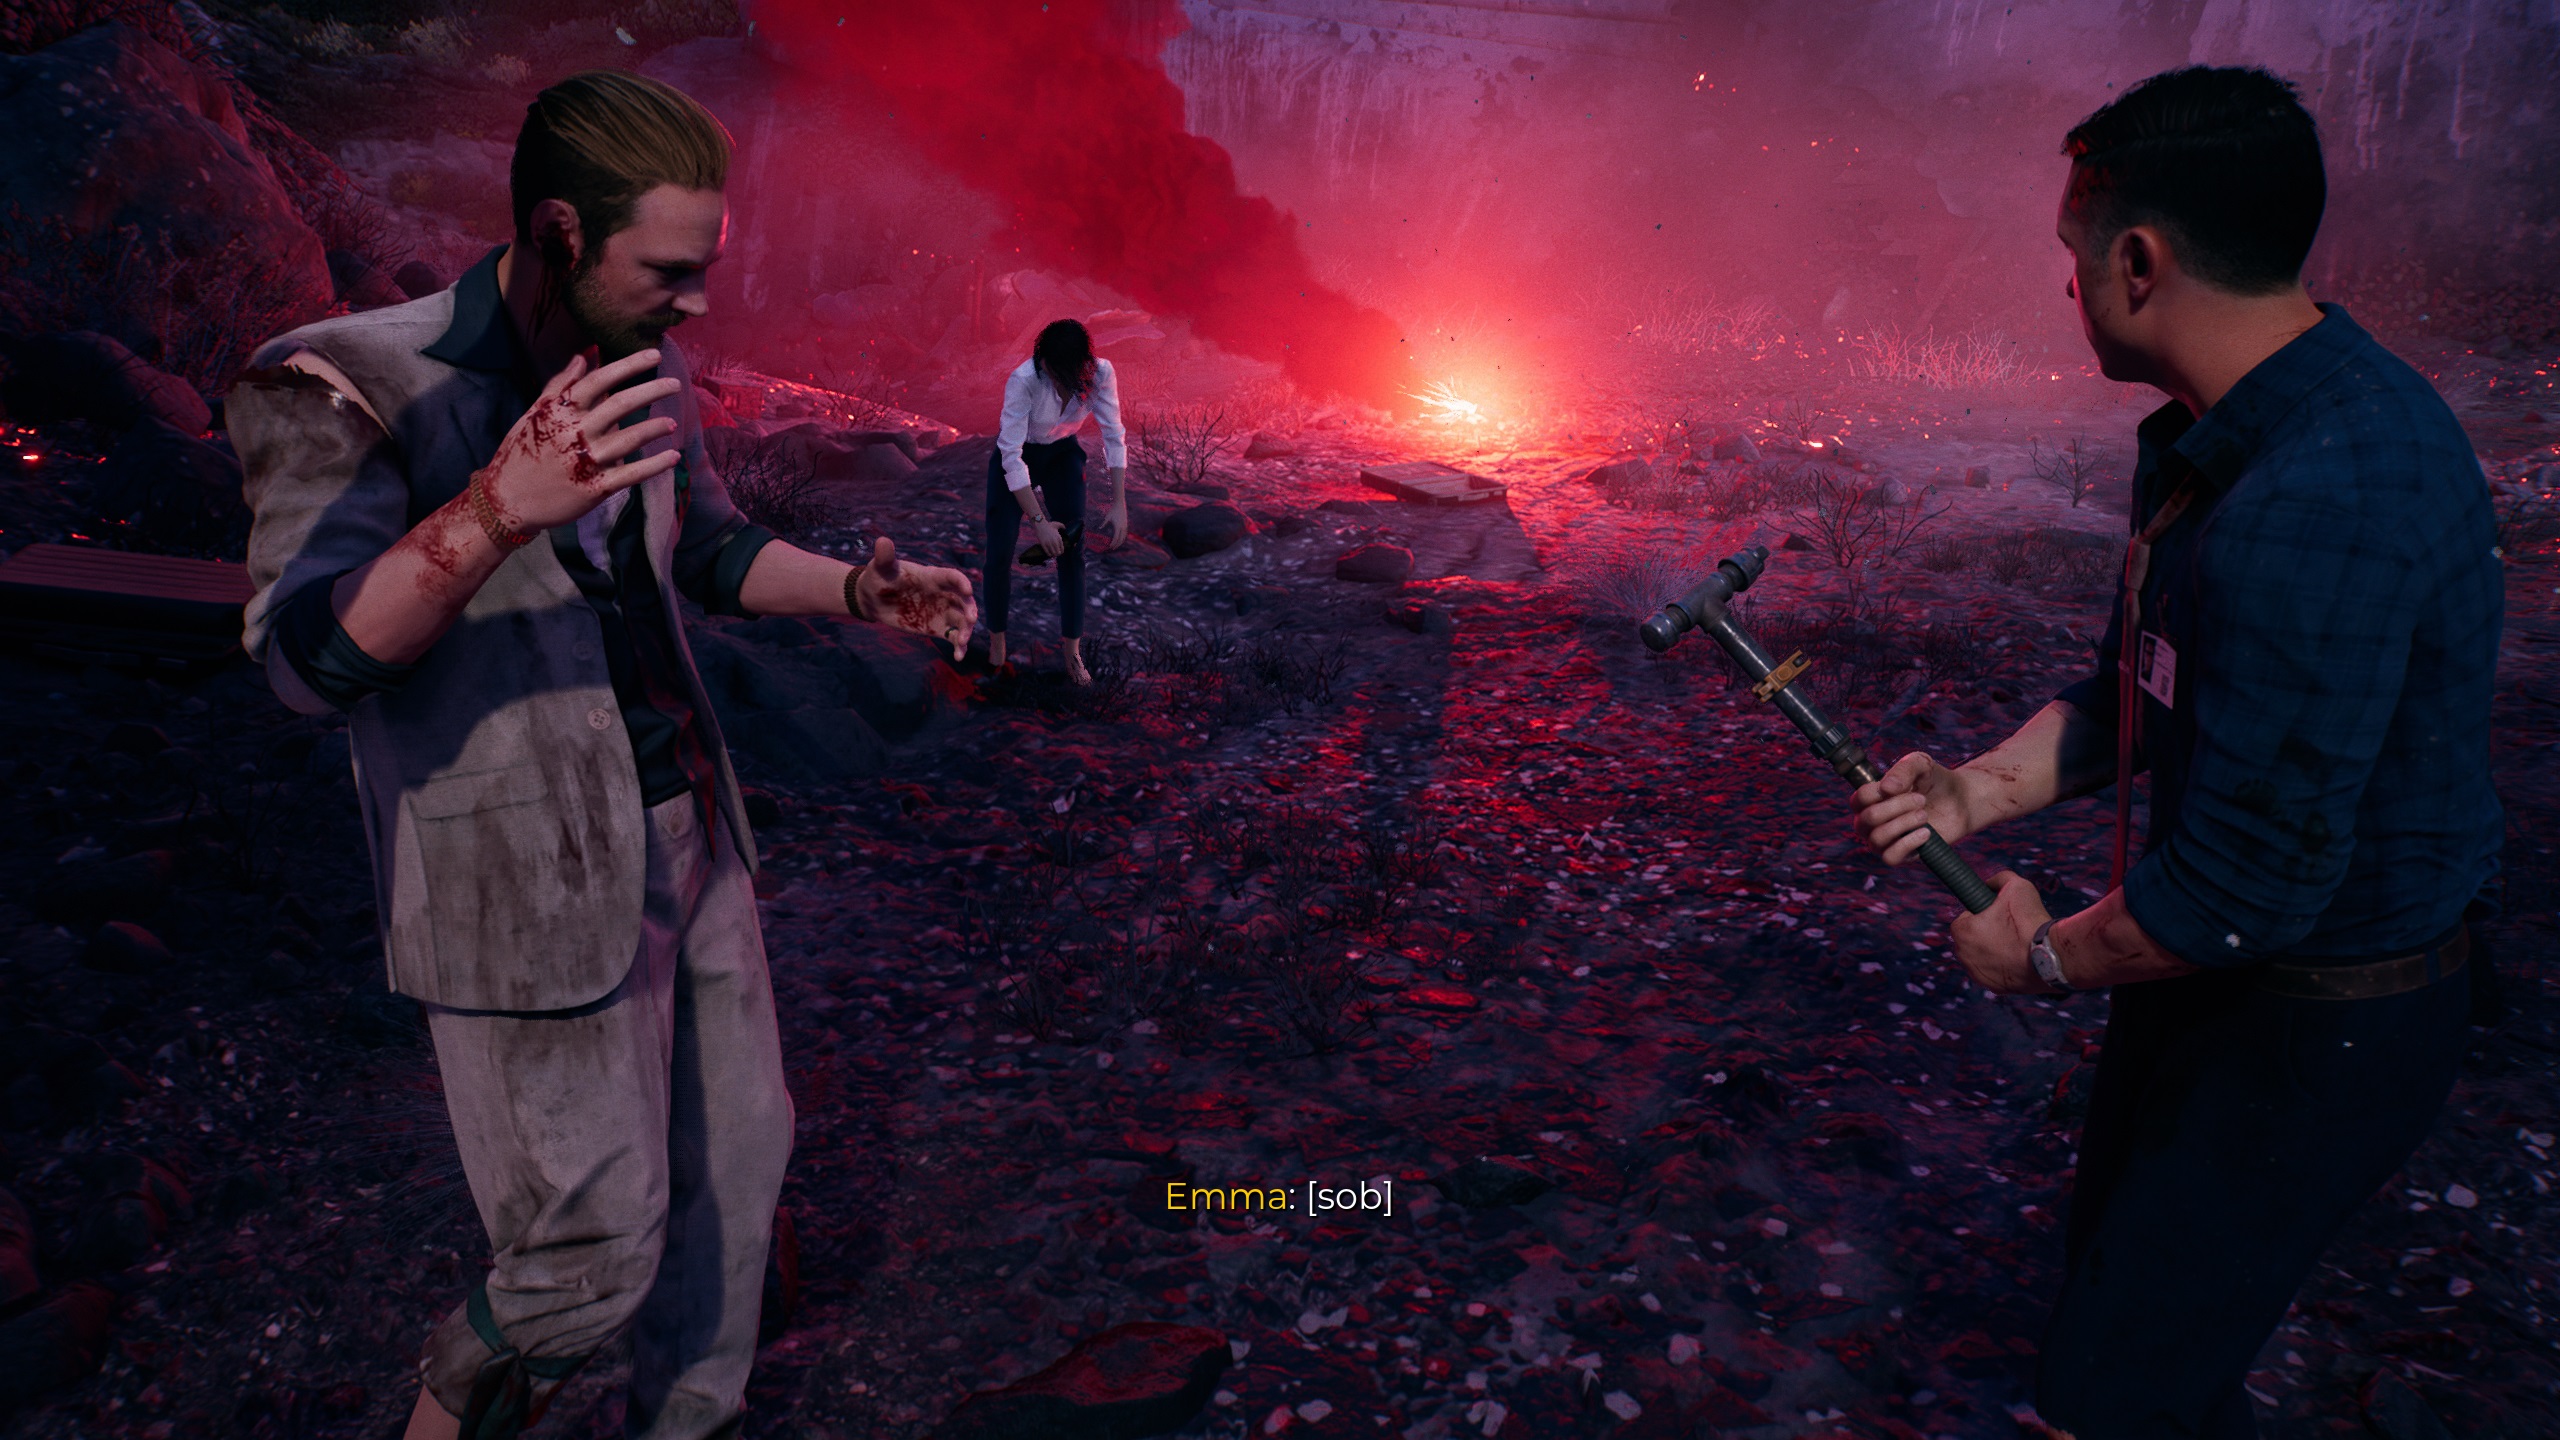 Dead Island 2 review – a bloody good time